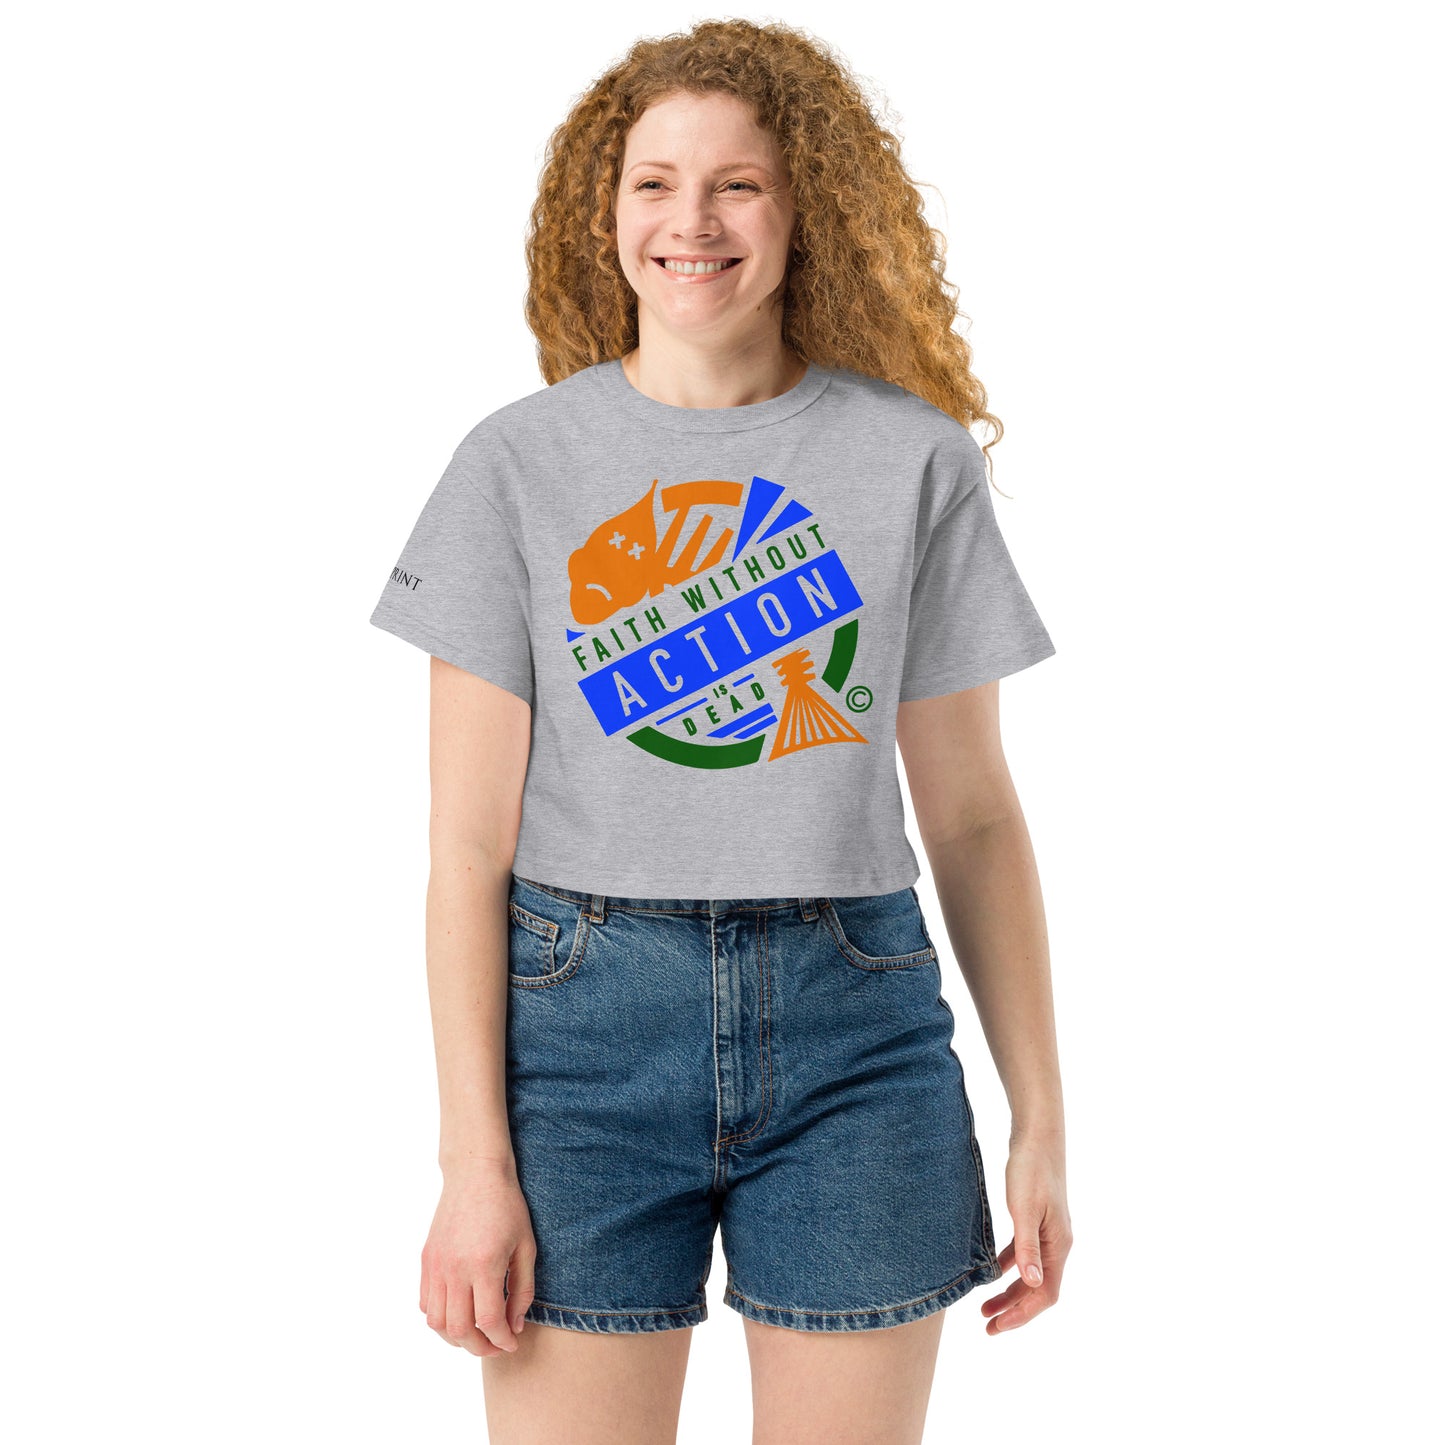 Faith Without Action is Dead Champion Crop Top